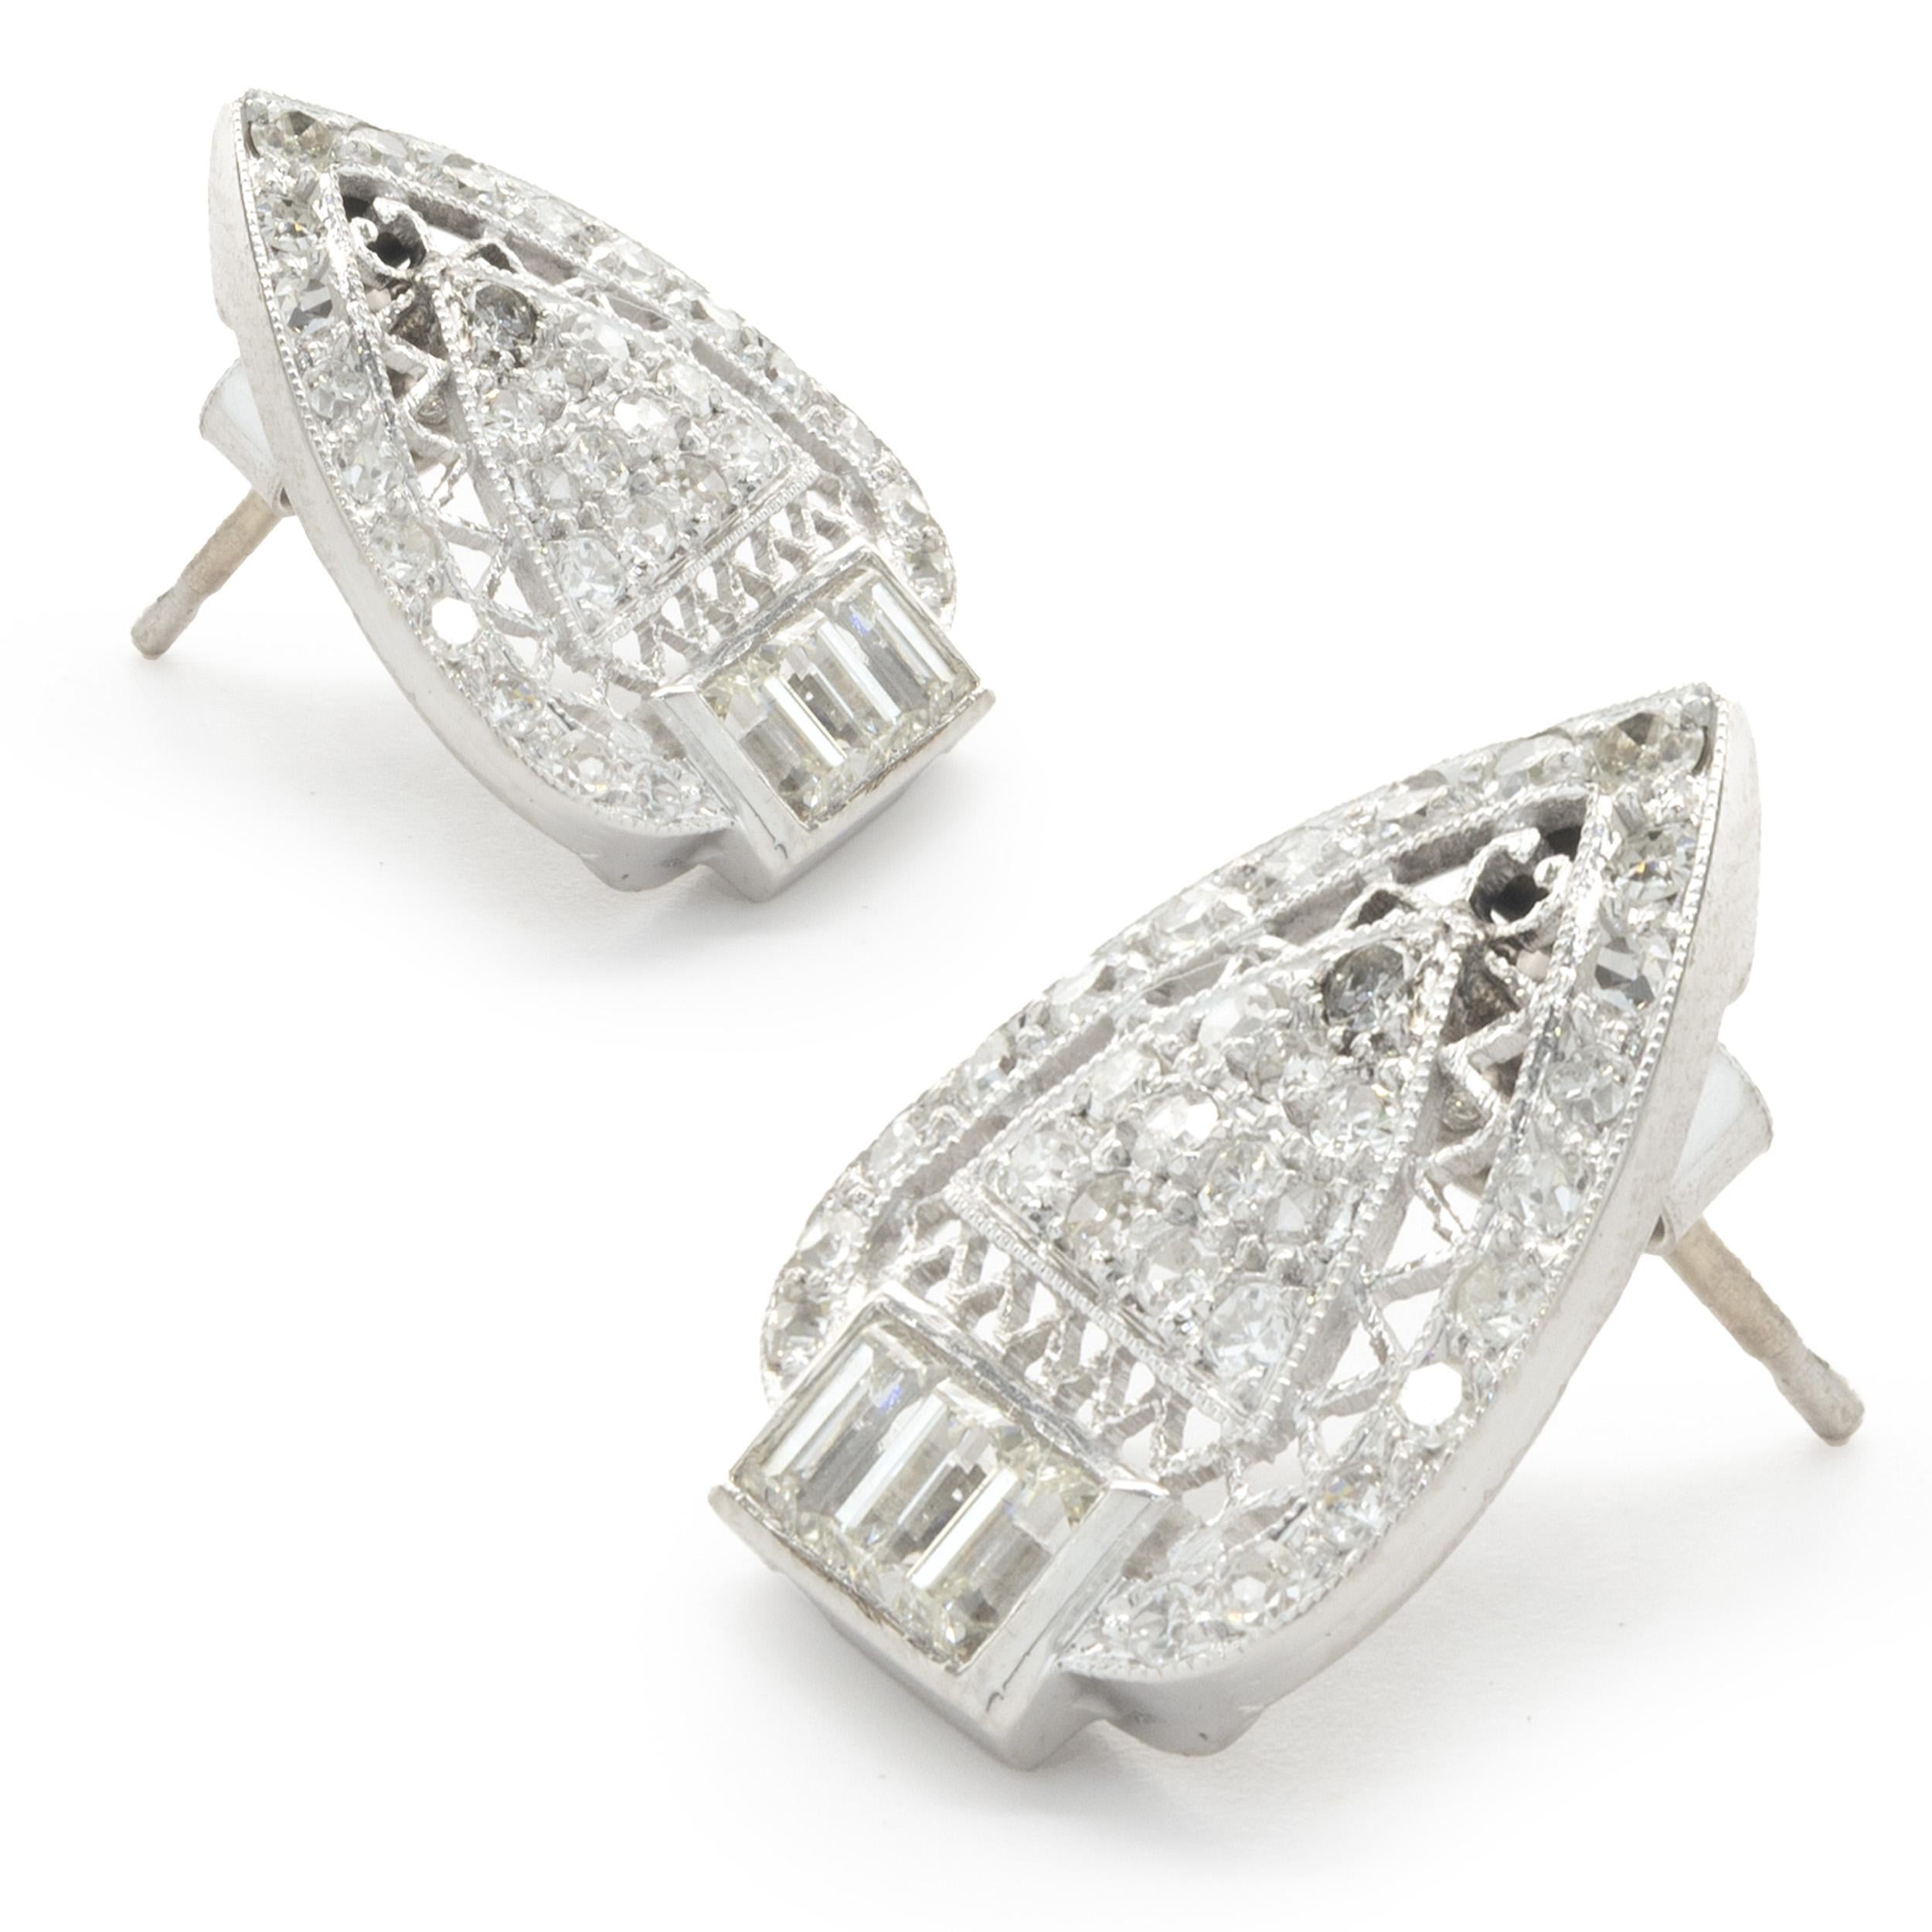 14 Karat White Gold Deco Style Diamond Earrings In Excellent Condition For Sale In Scottsdale, AZ